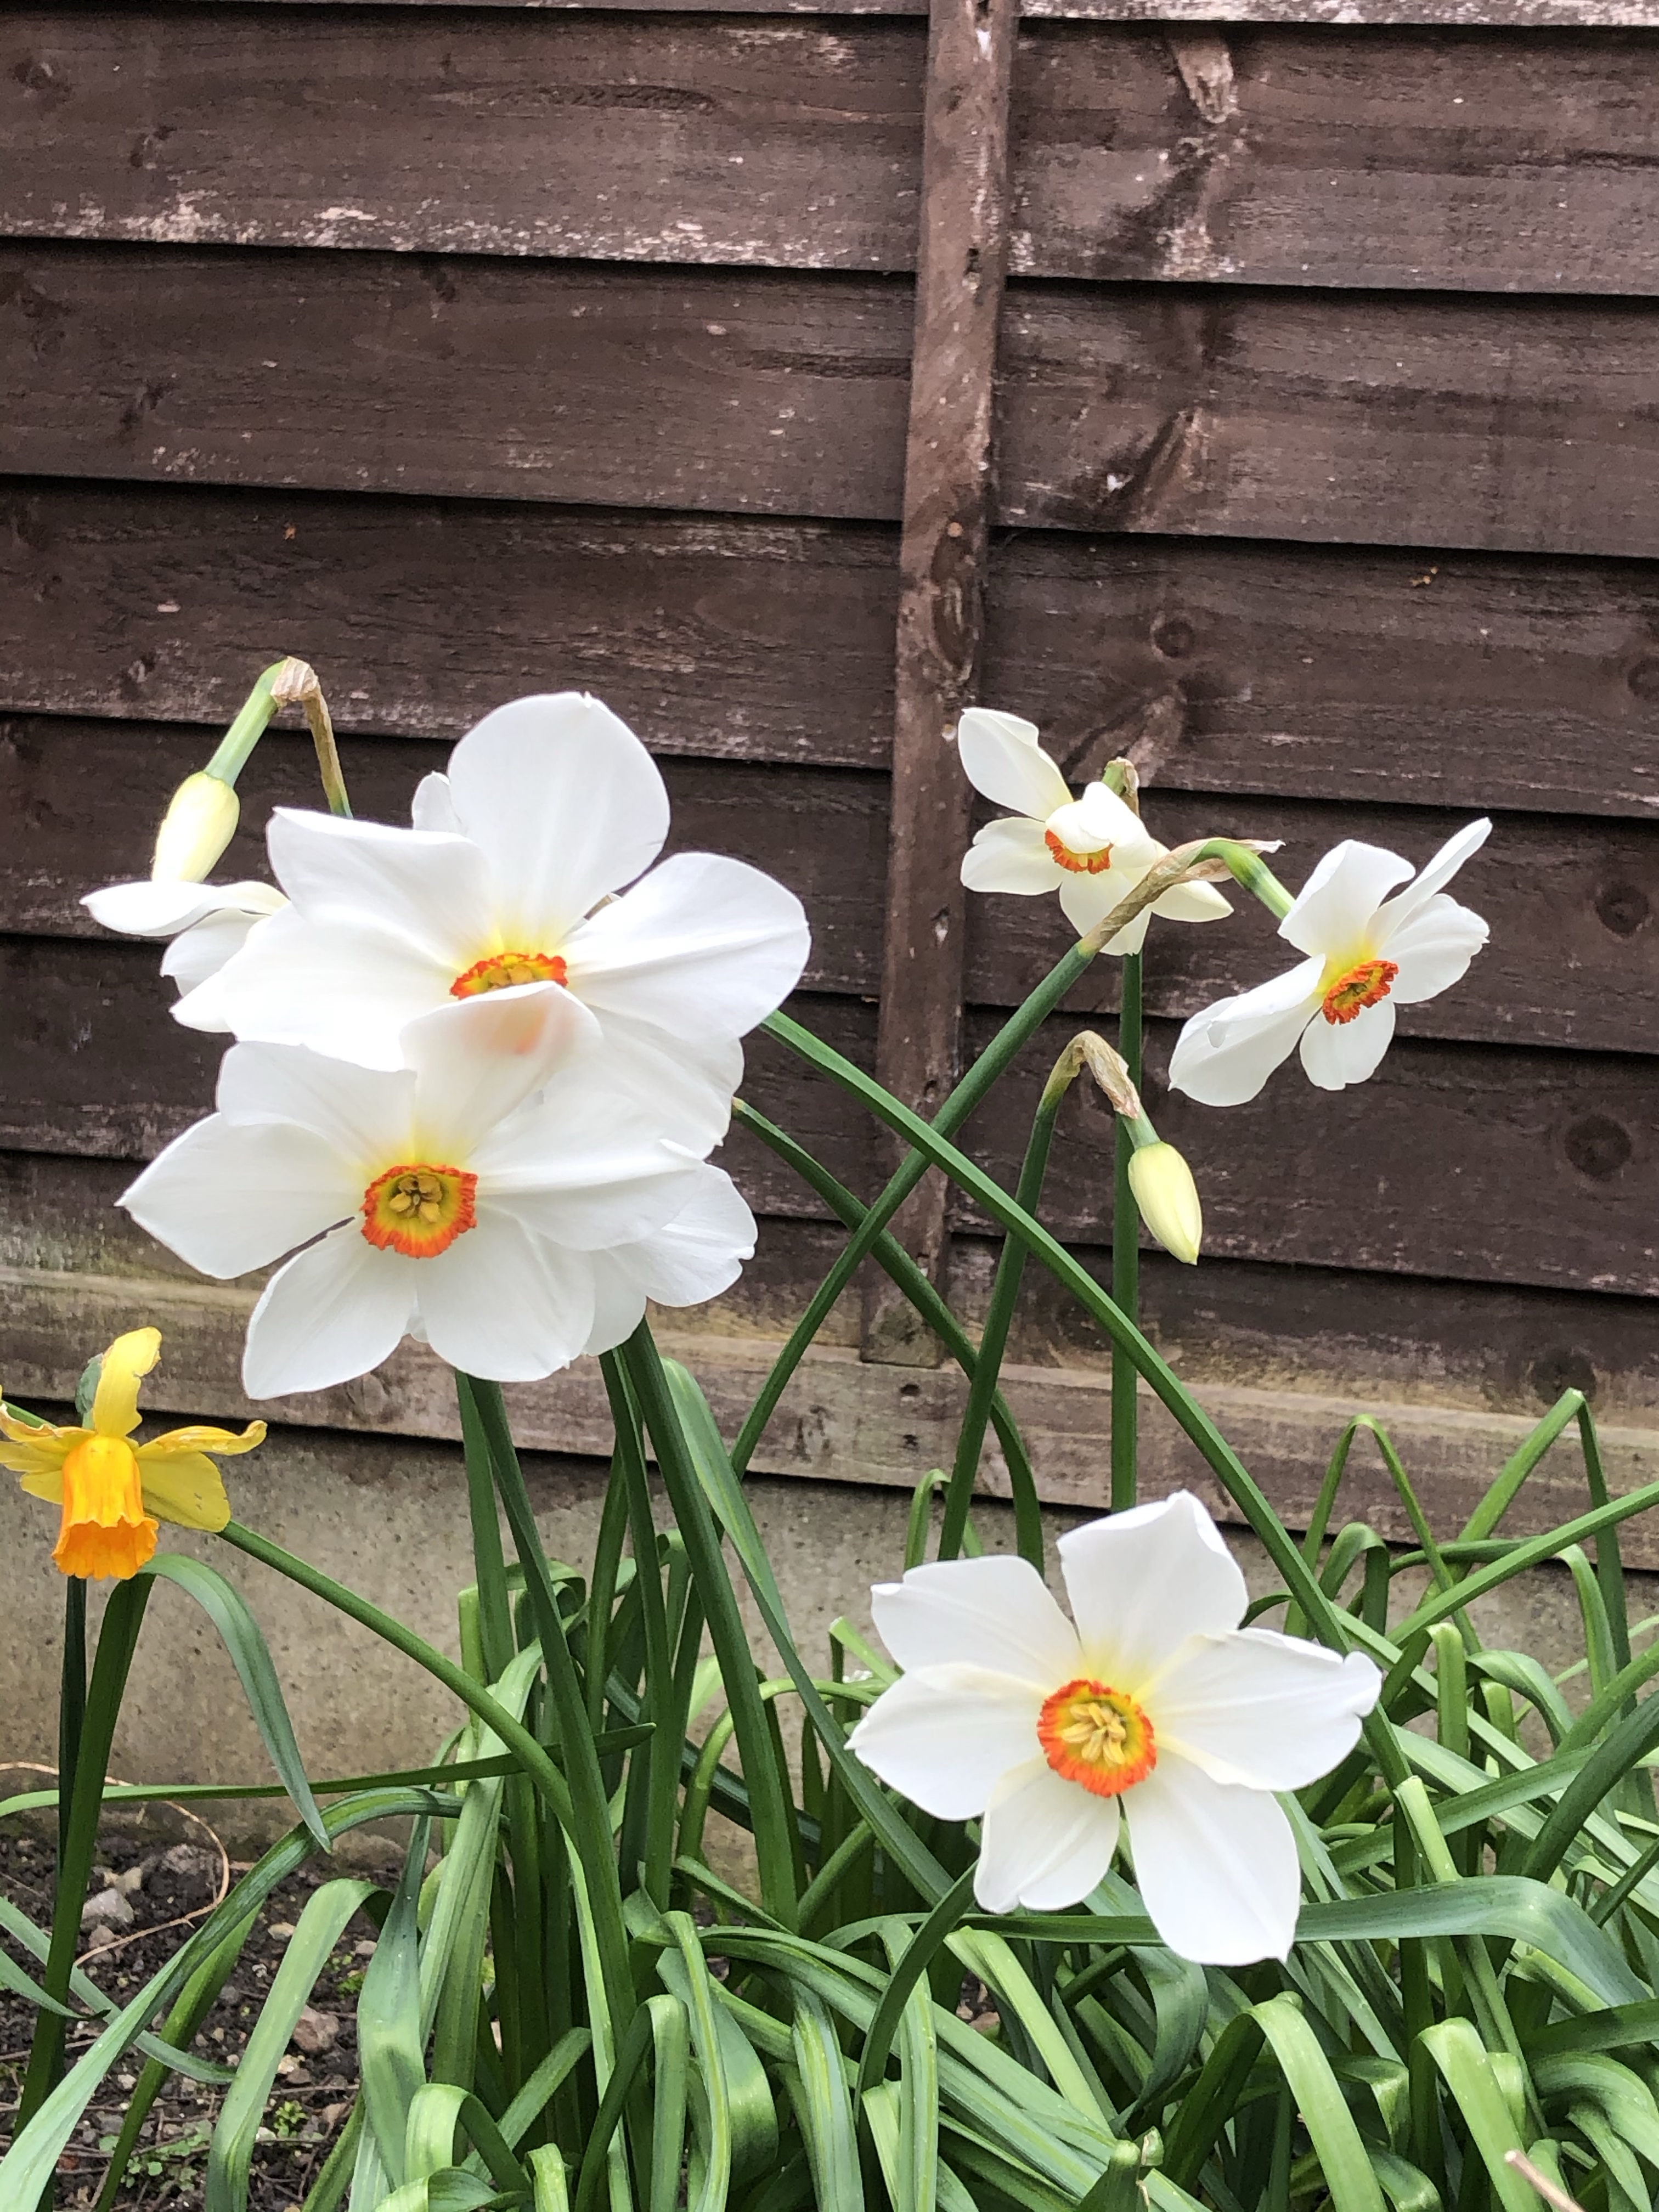 How to Grow Poet’s Narcissus Flowers